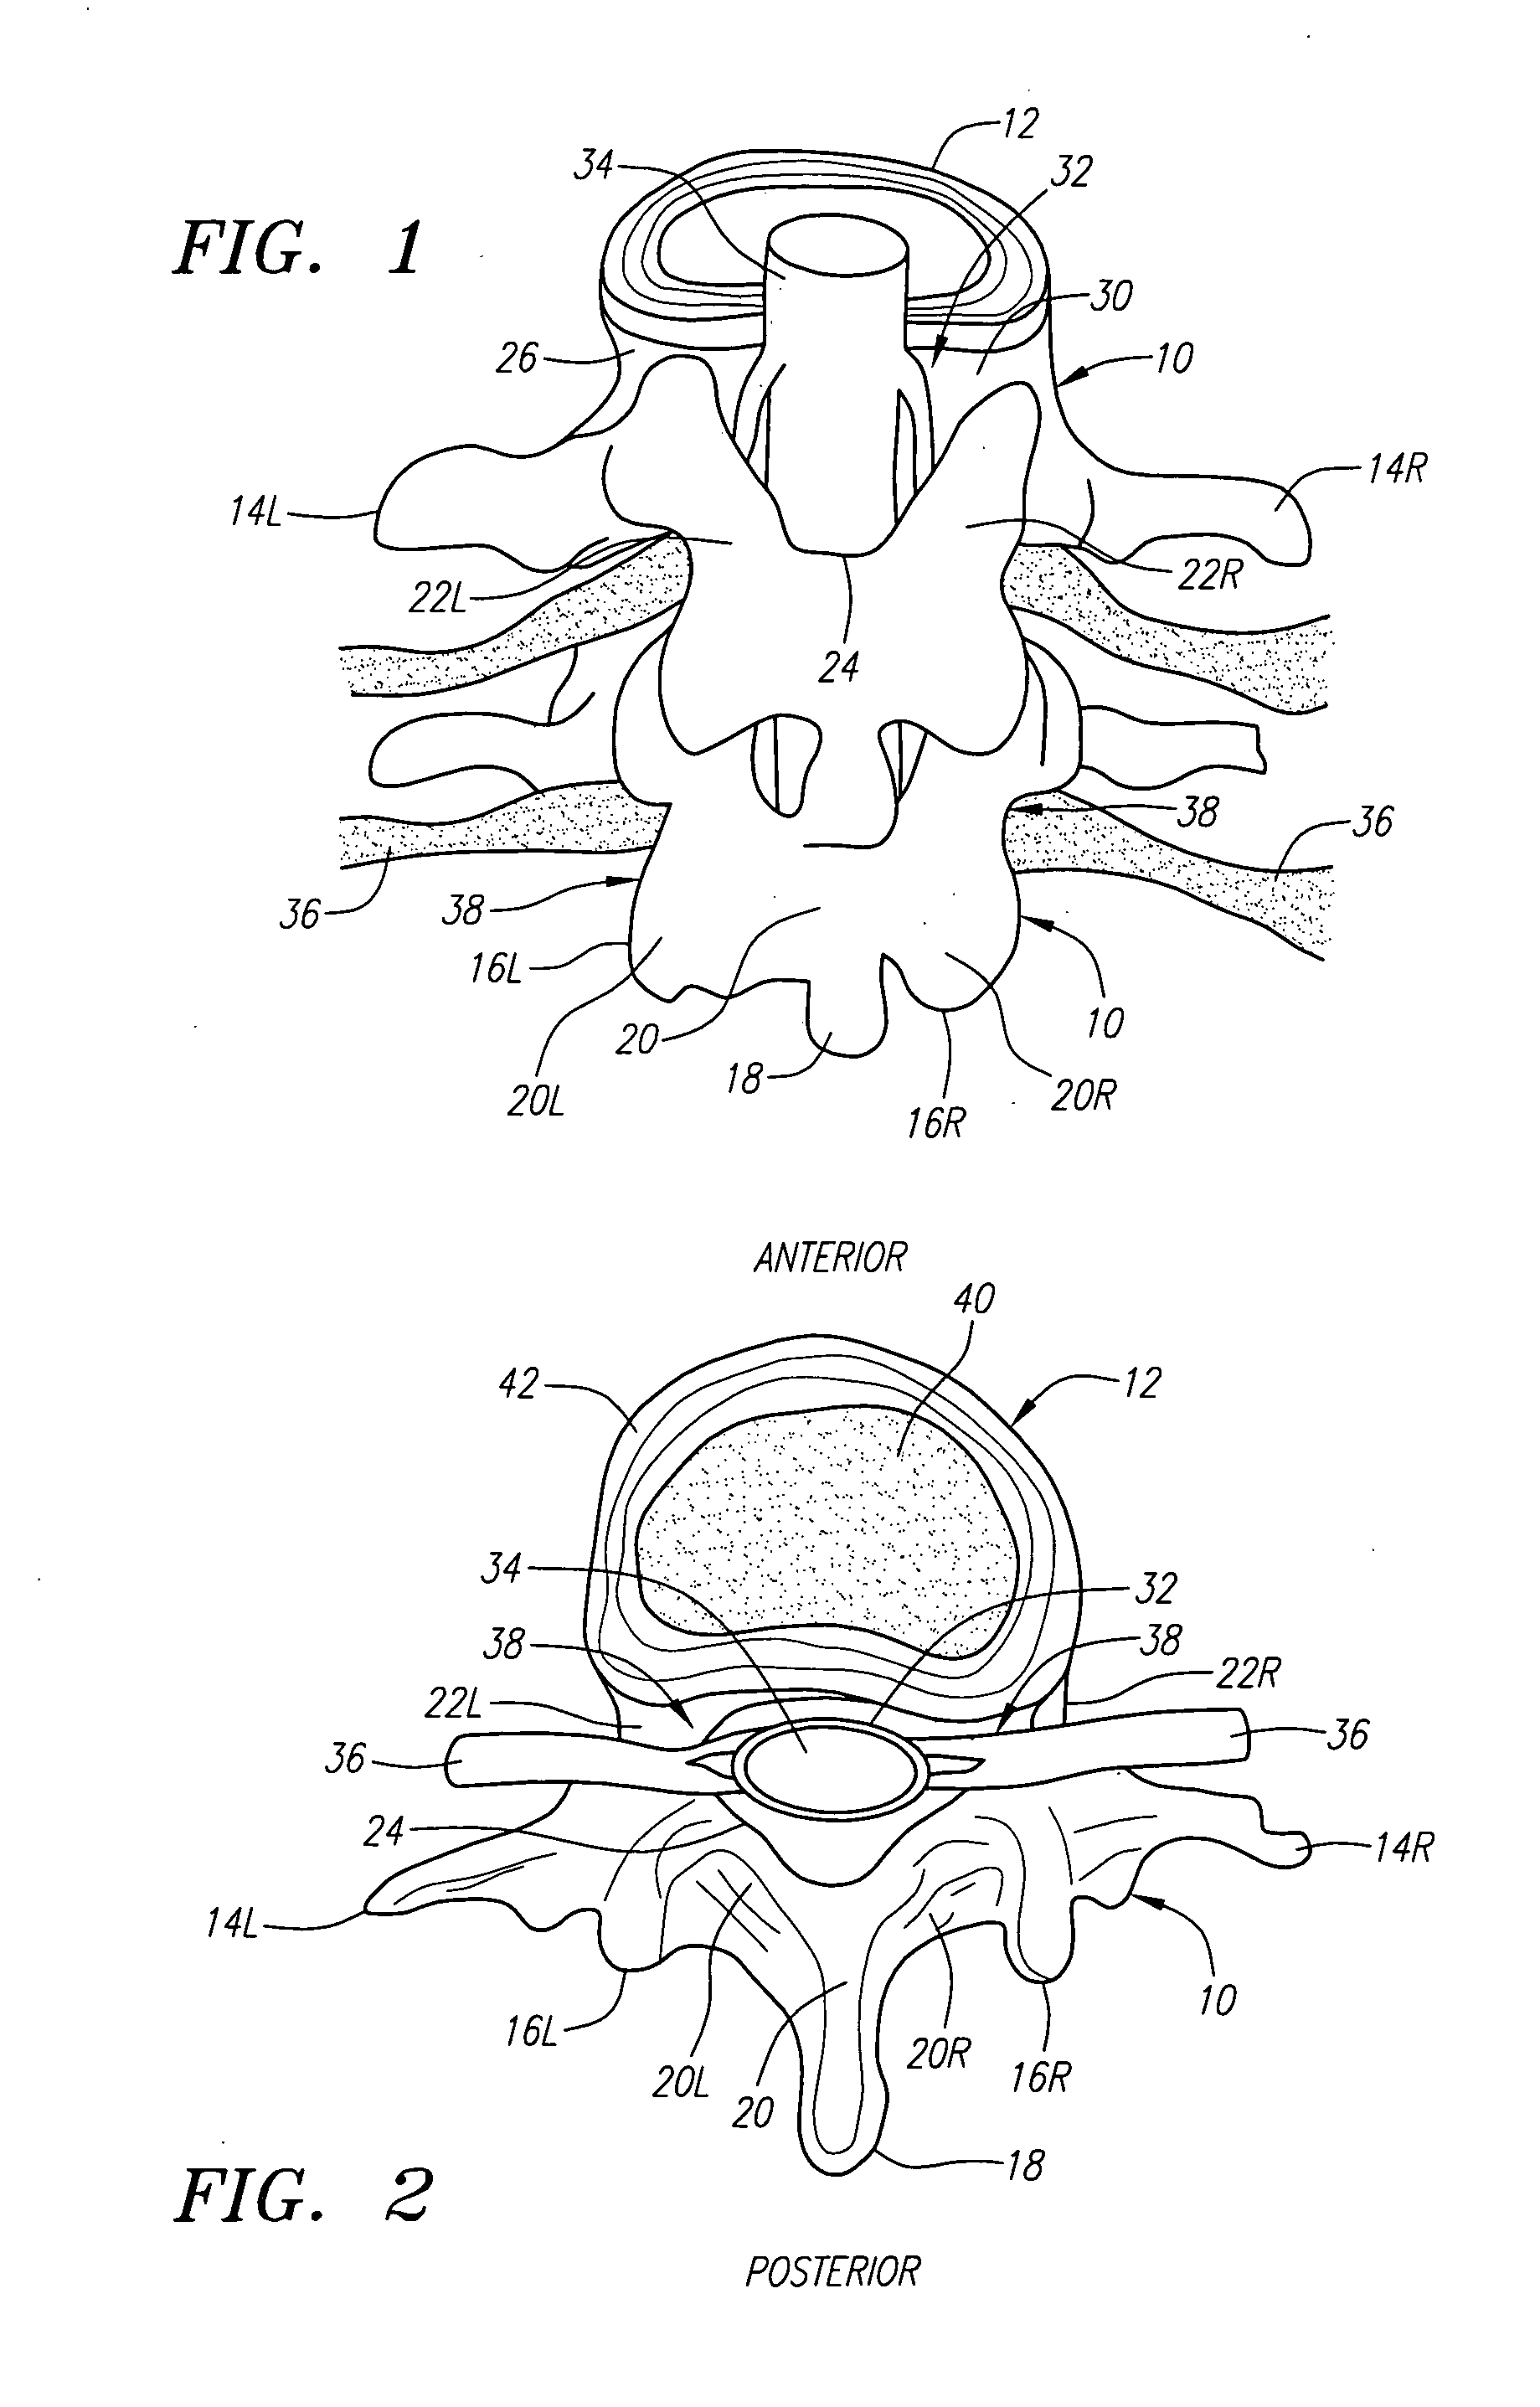 Apparatus and methods for removing vertebral bone and disc tissue